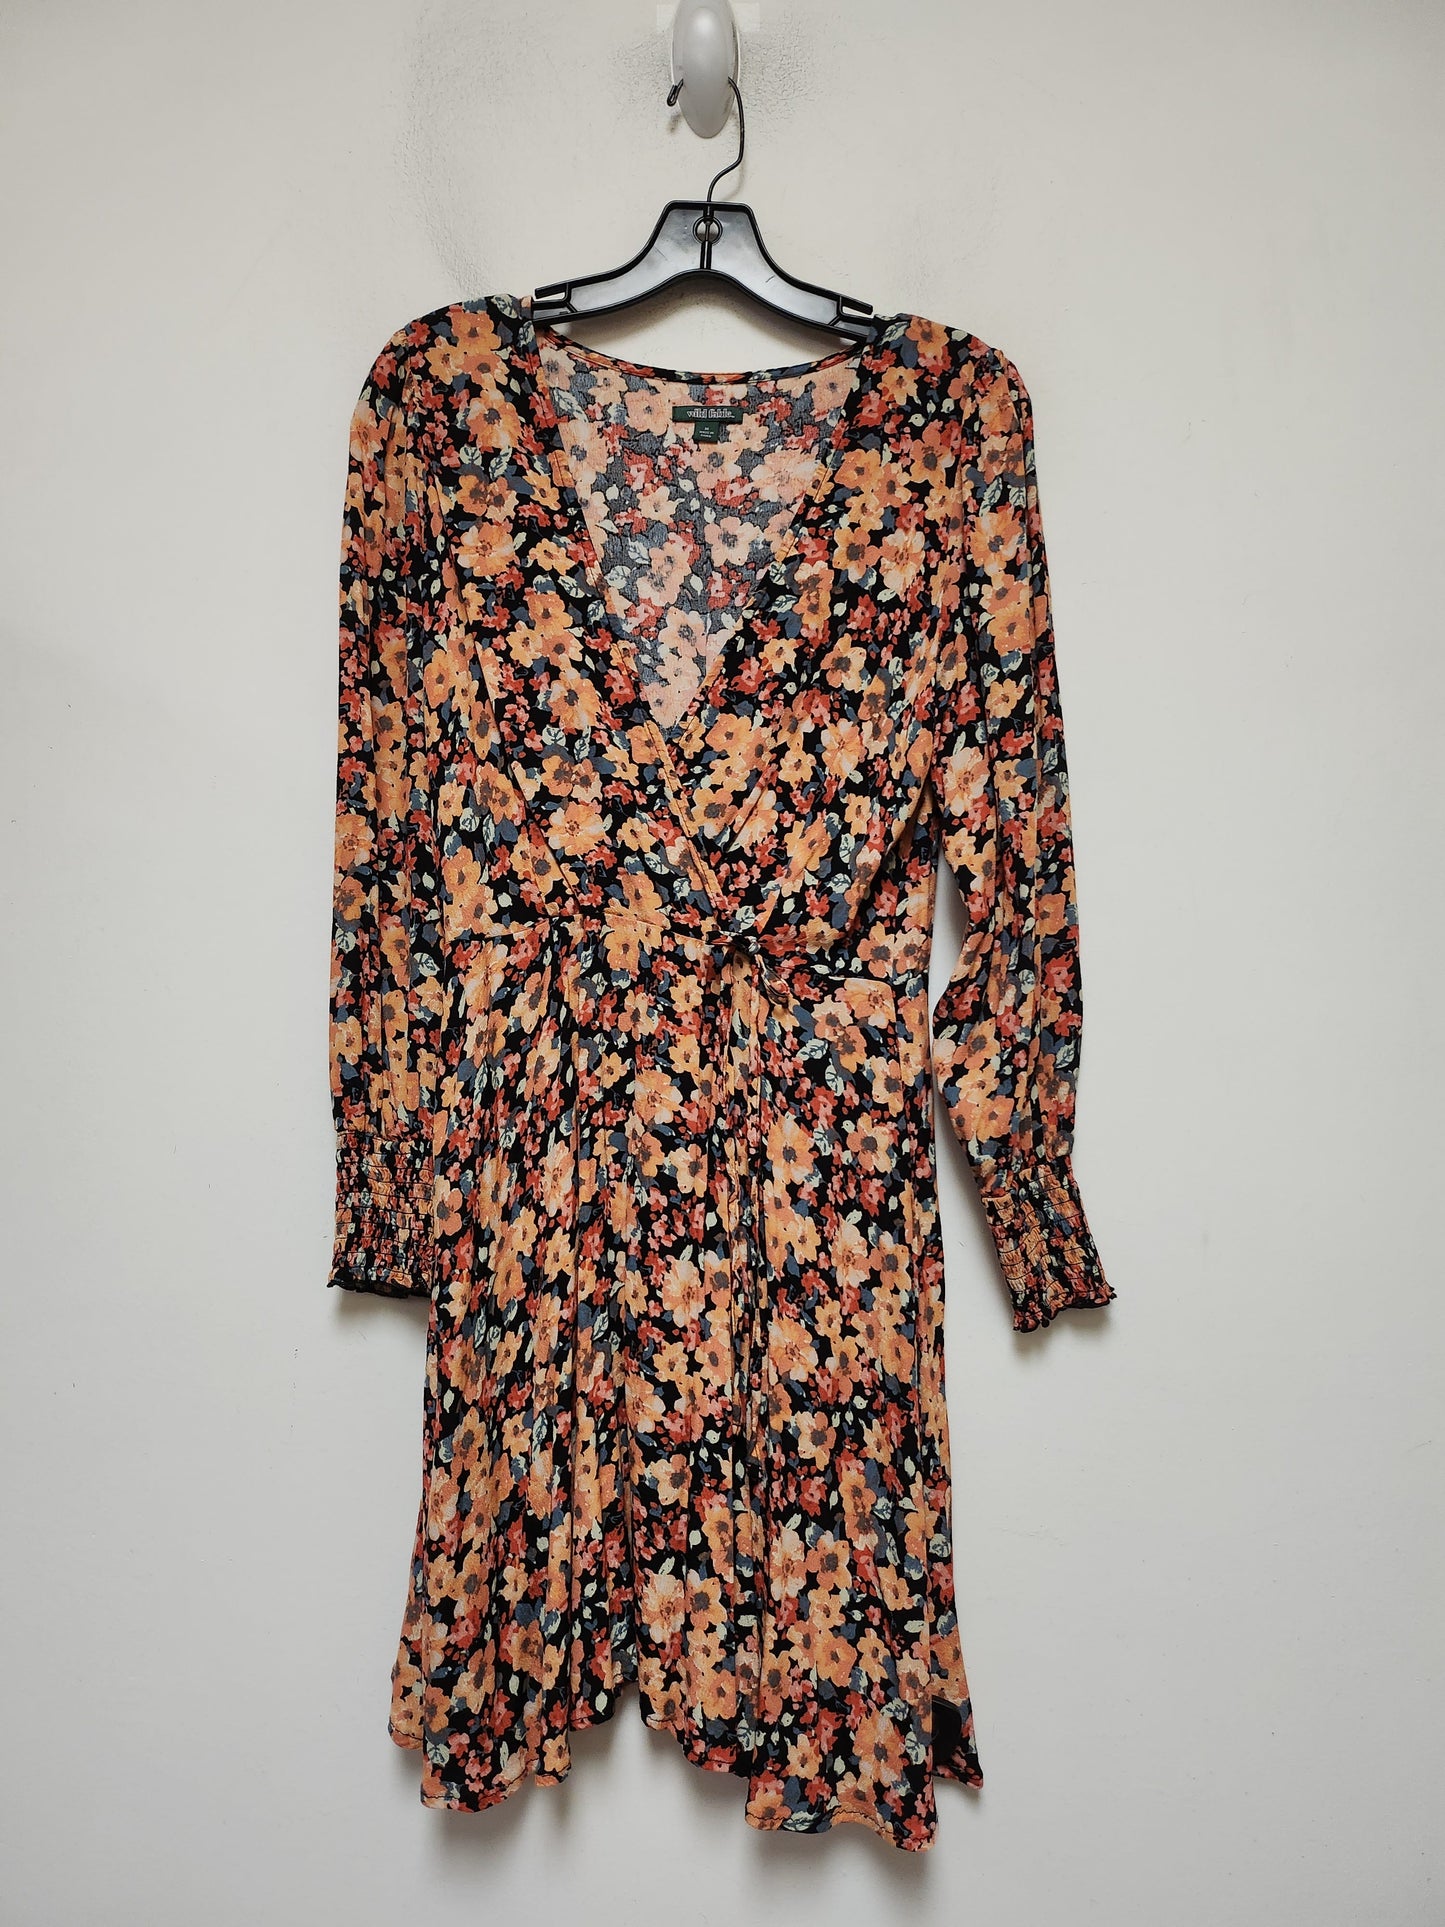 Floral Print Dress Casual Short Wild Fable, Size M